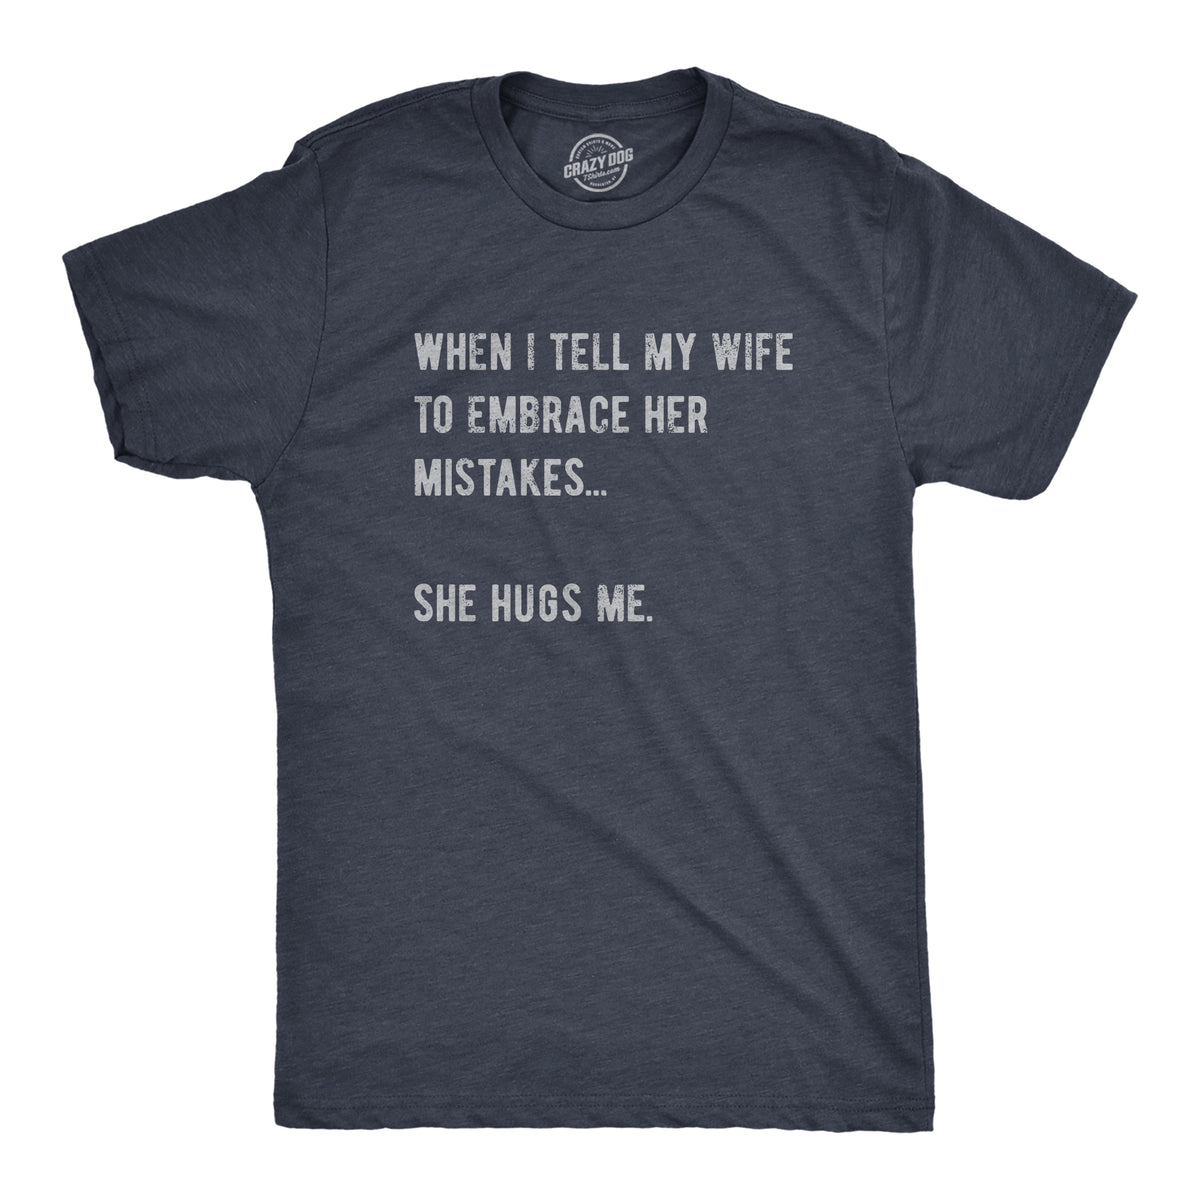 Funny Heather Navy - MISTAKES When I Tell My Wife To Embrace Her Mistakes She Hugs Me Mens T Shirt Nerdy Sarcastic Tee